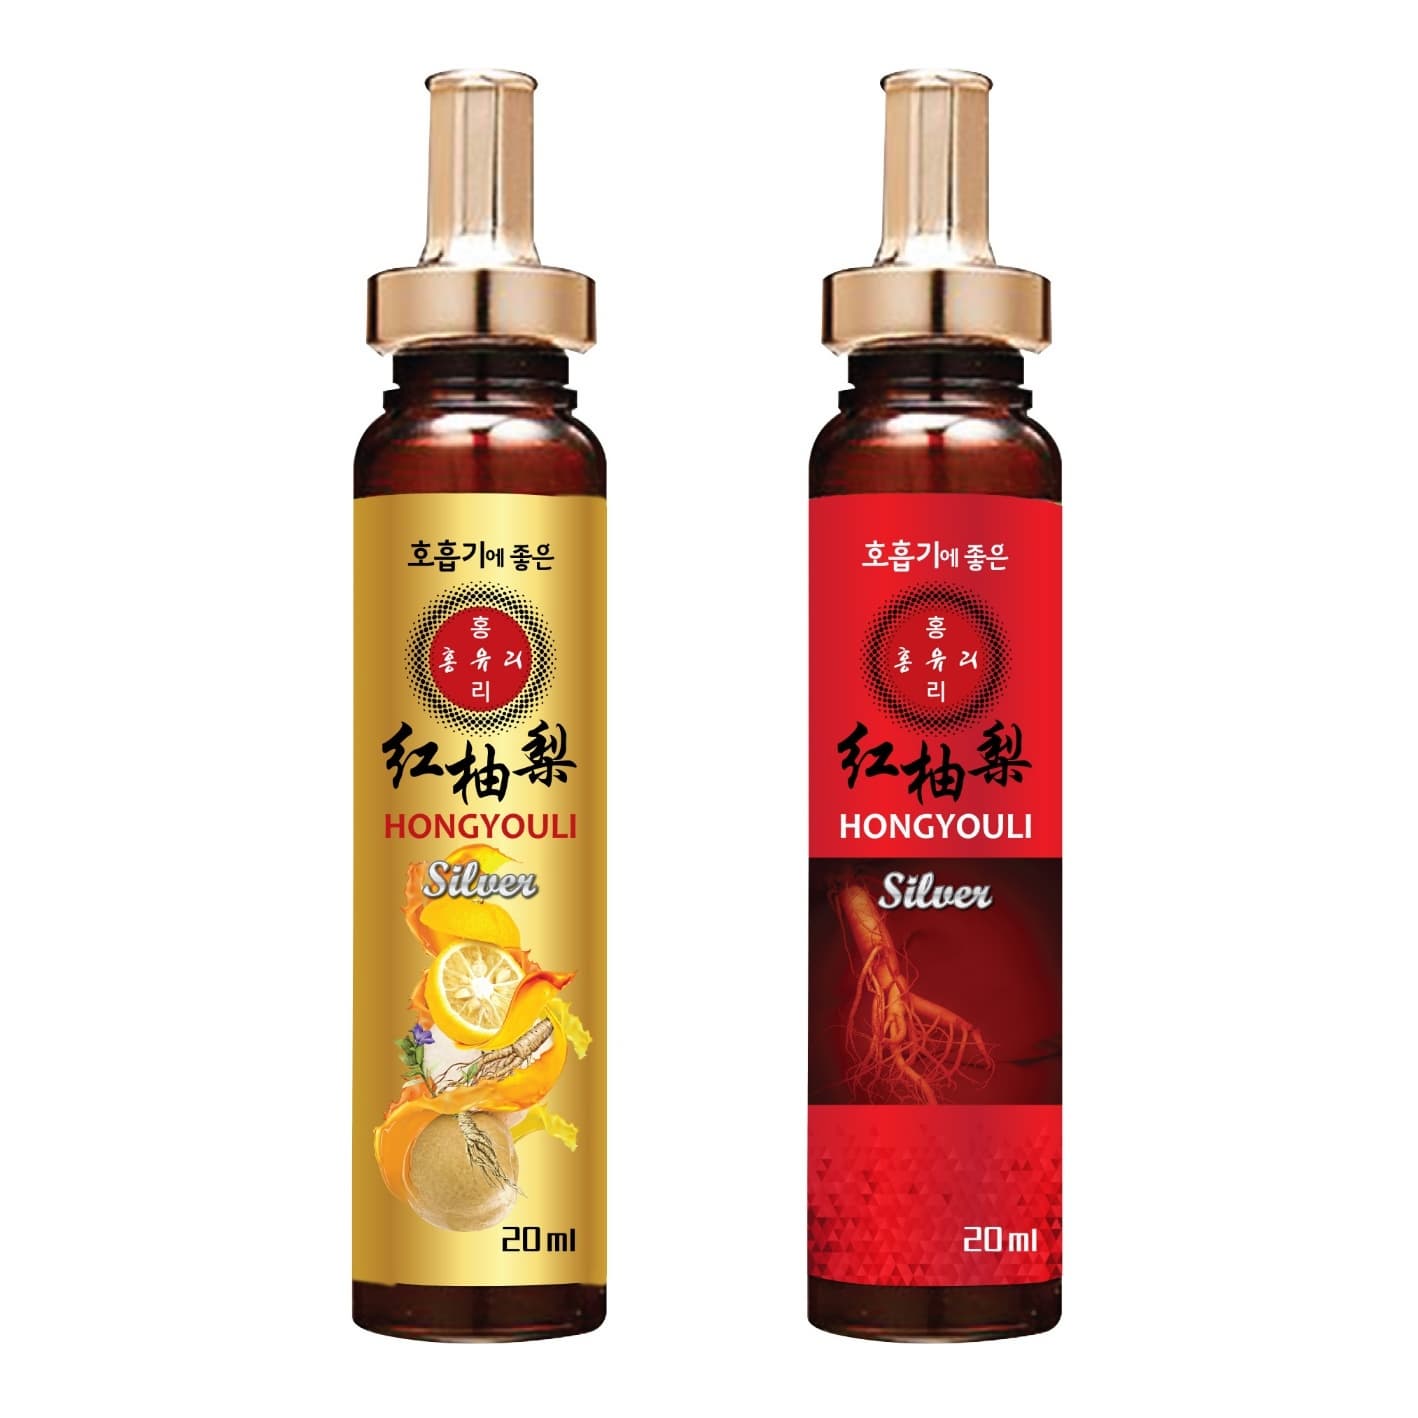 silver Hongyouli_ a drink that is good for the respiratory system